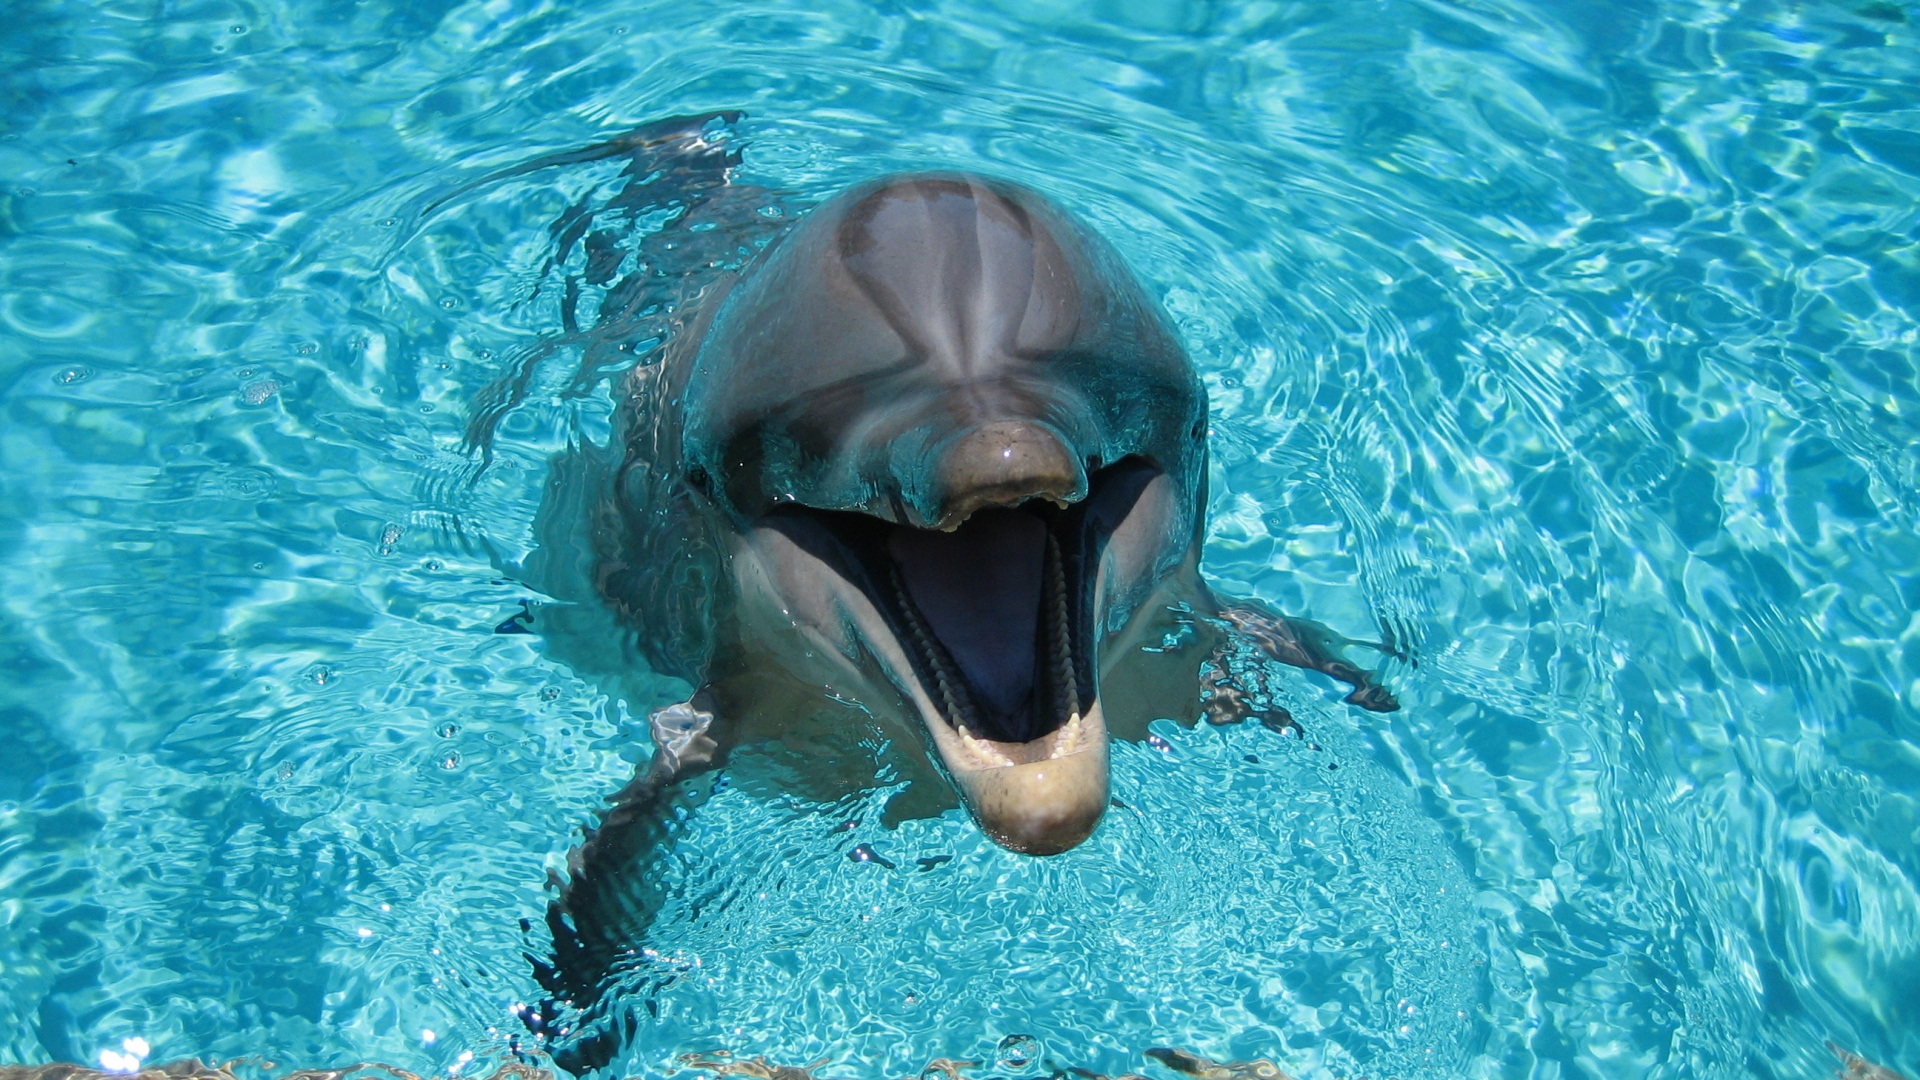 Wallpaper Dolphin Smiling Water Pool Full HD 1080p